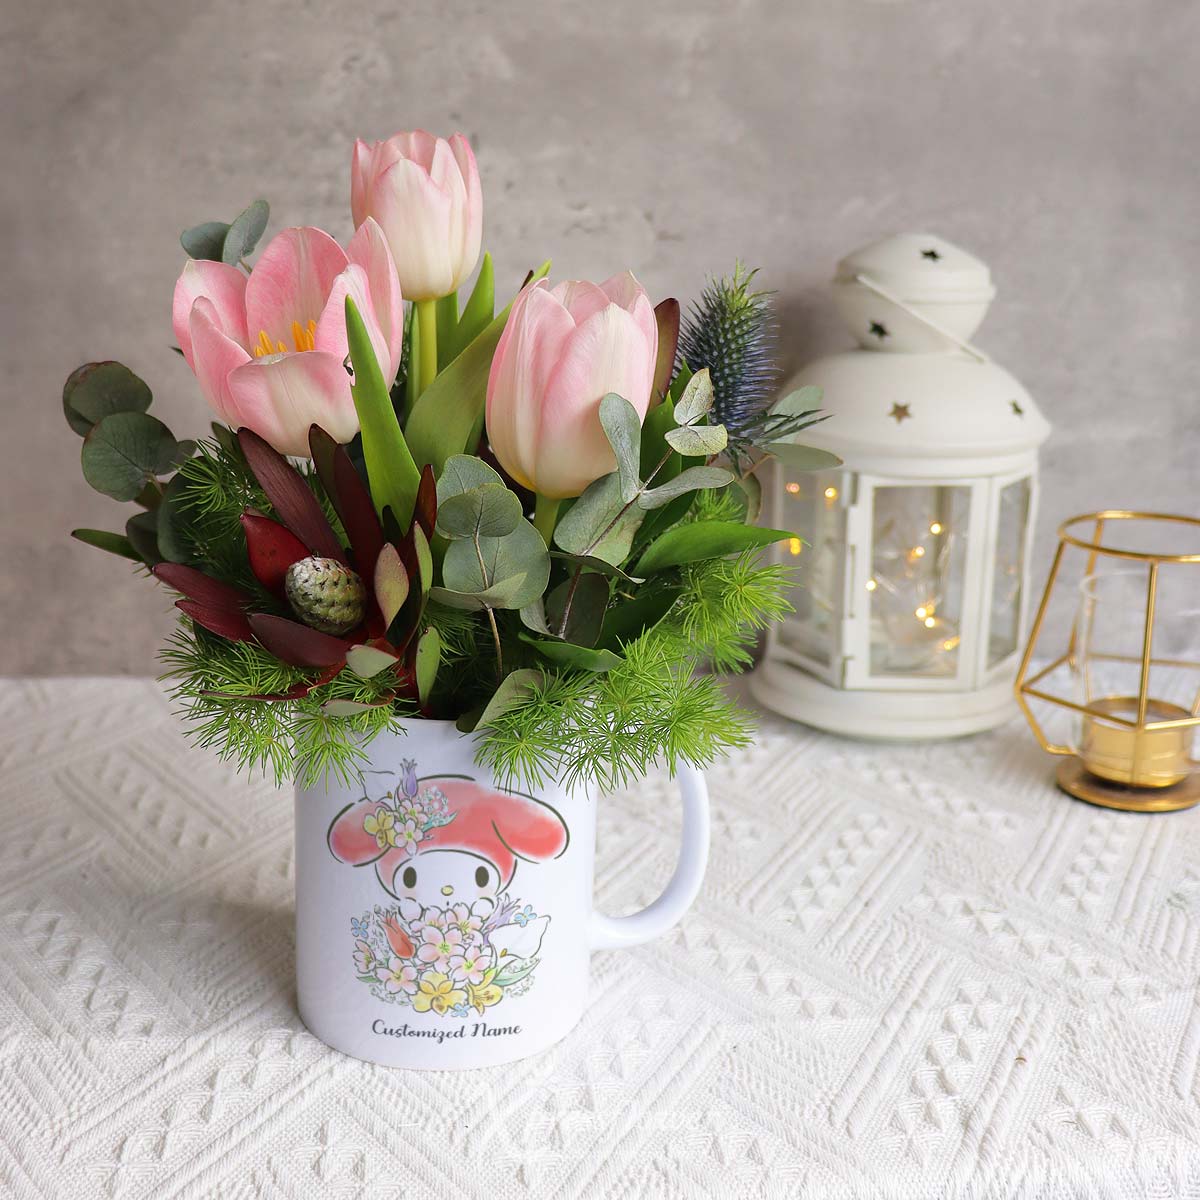 SNMG2312_Aries Florals 3 Pink Tulips with My Melody Personalised Mug Aries 3a